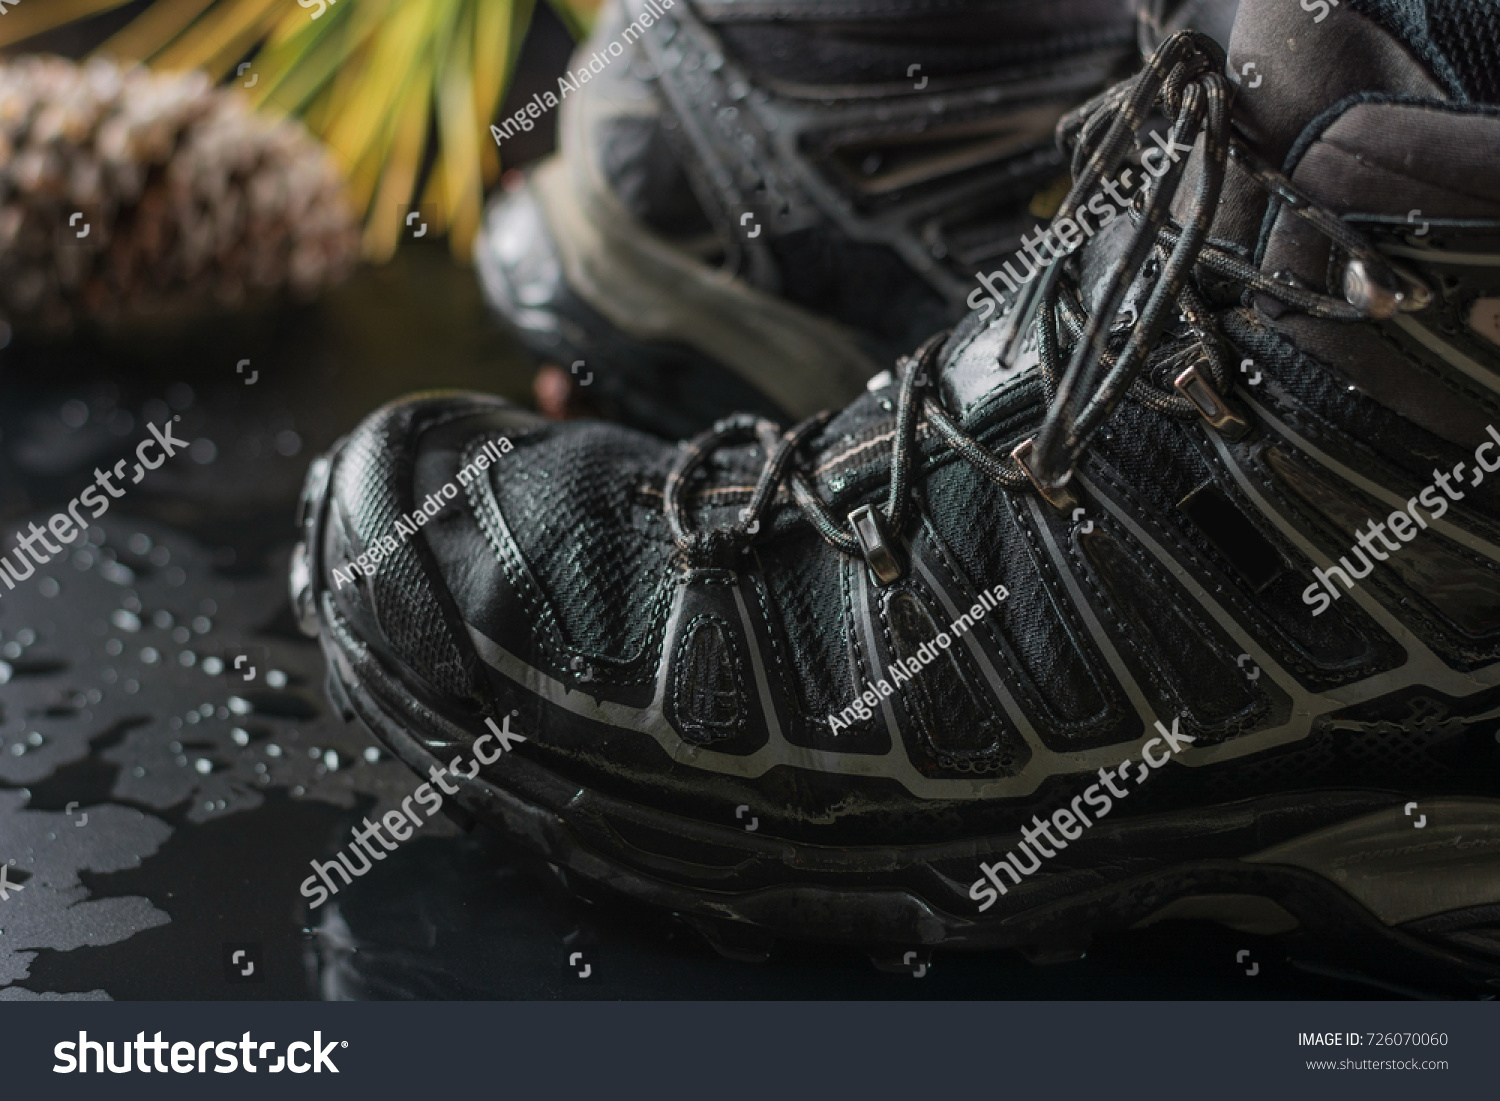 wet hiking boots